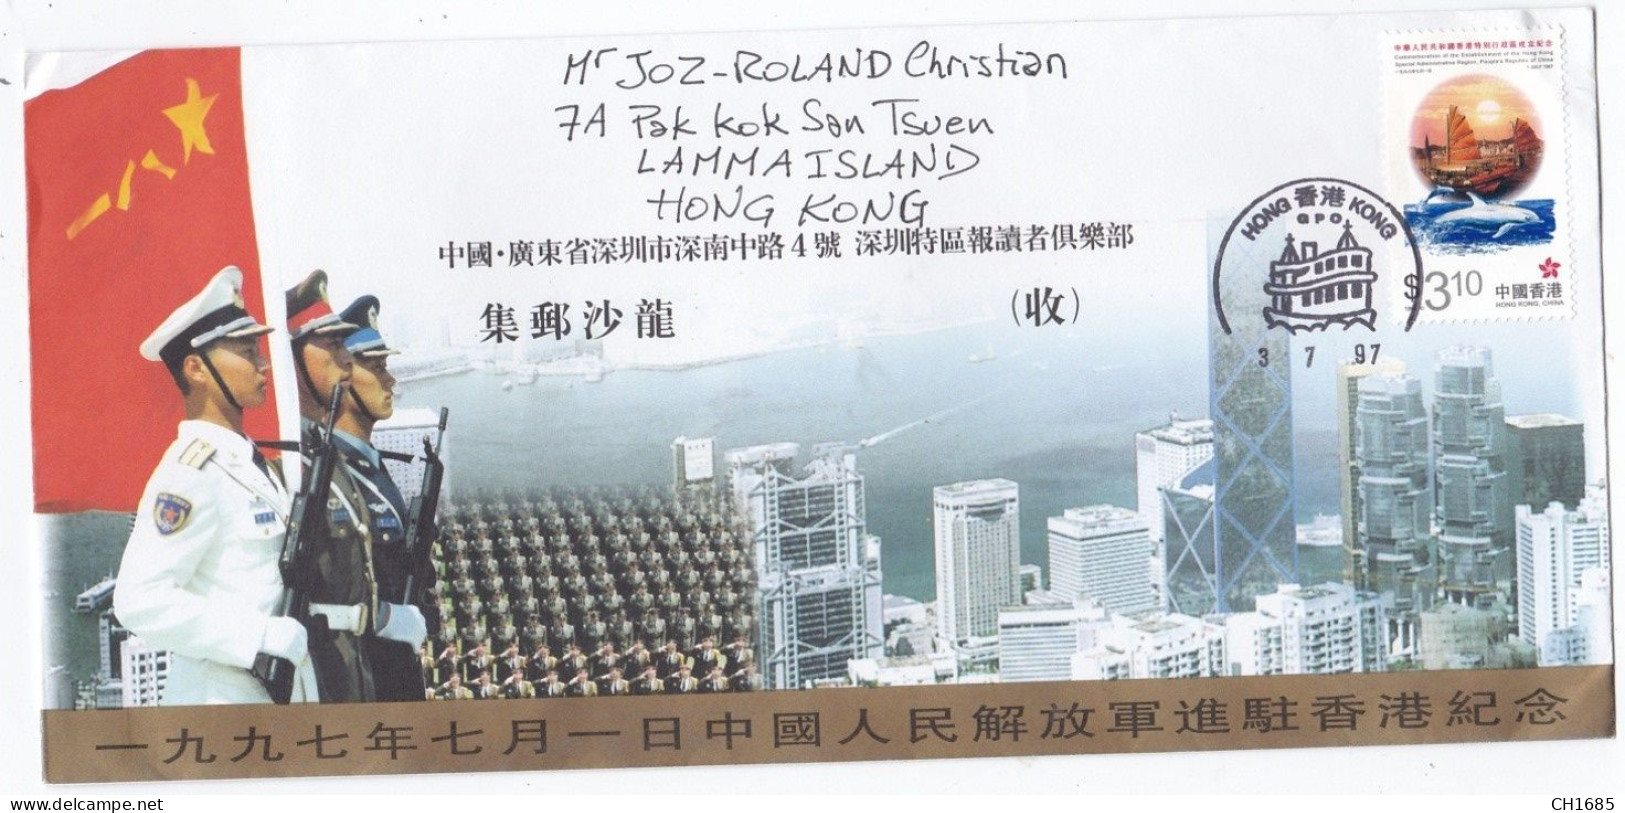 HONG KONG : FDC Jonques Et Dauphin 1985 . Militaires - FDC